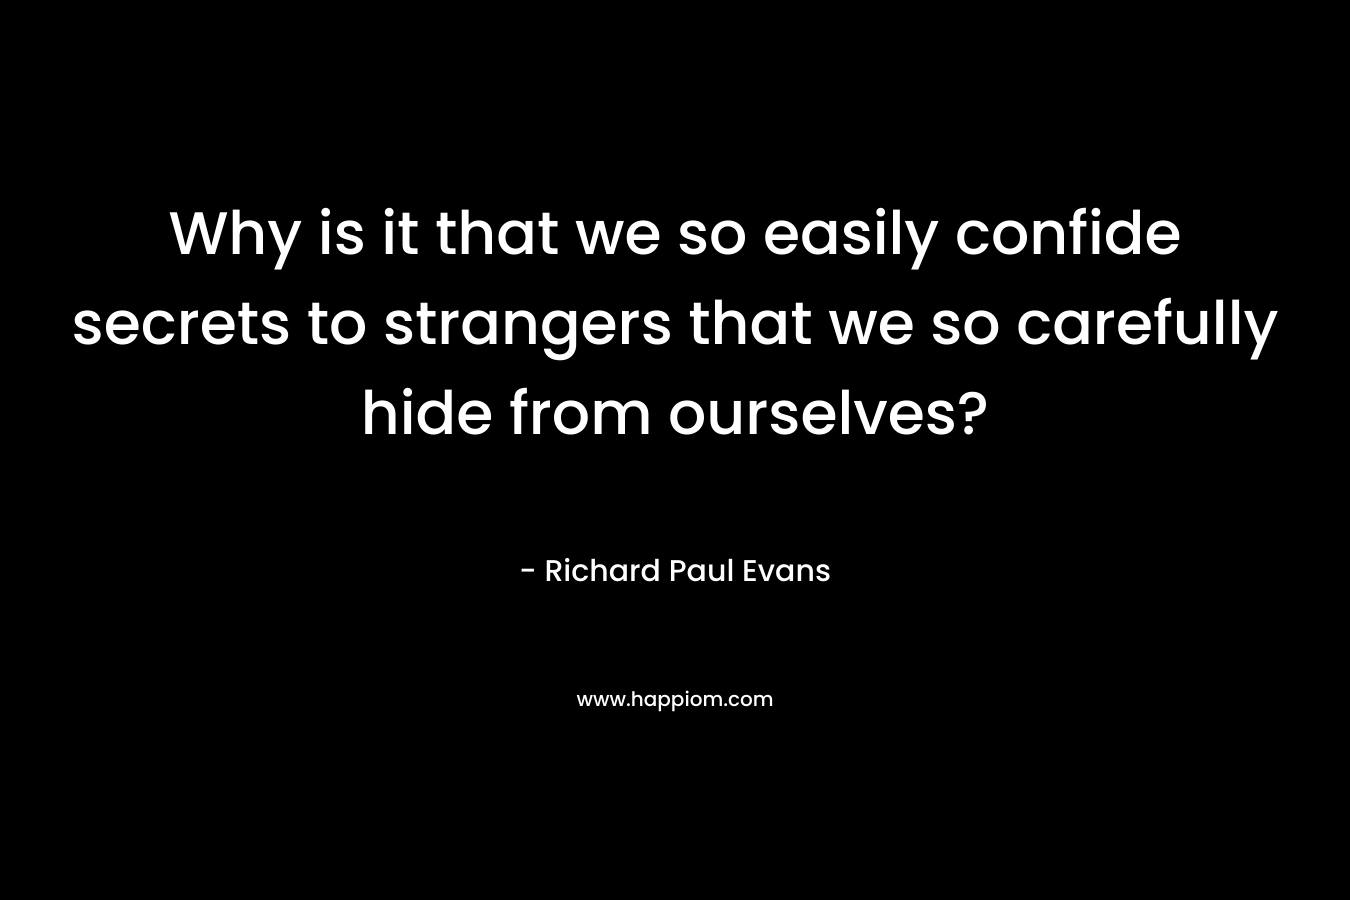 Why is it that we so easily confide secrets to strangers that we so carefully hide from ourselves? – Richard Paul Evans